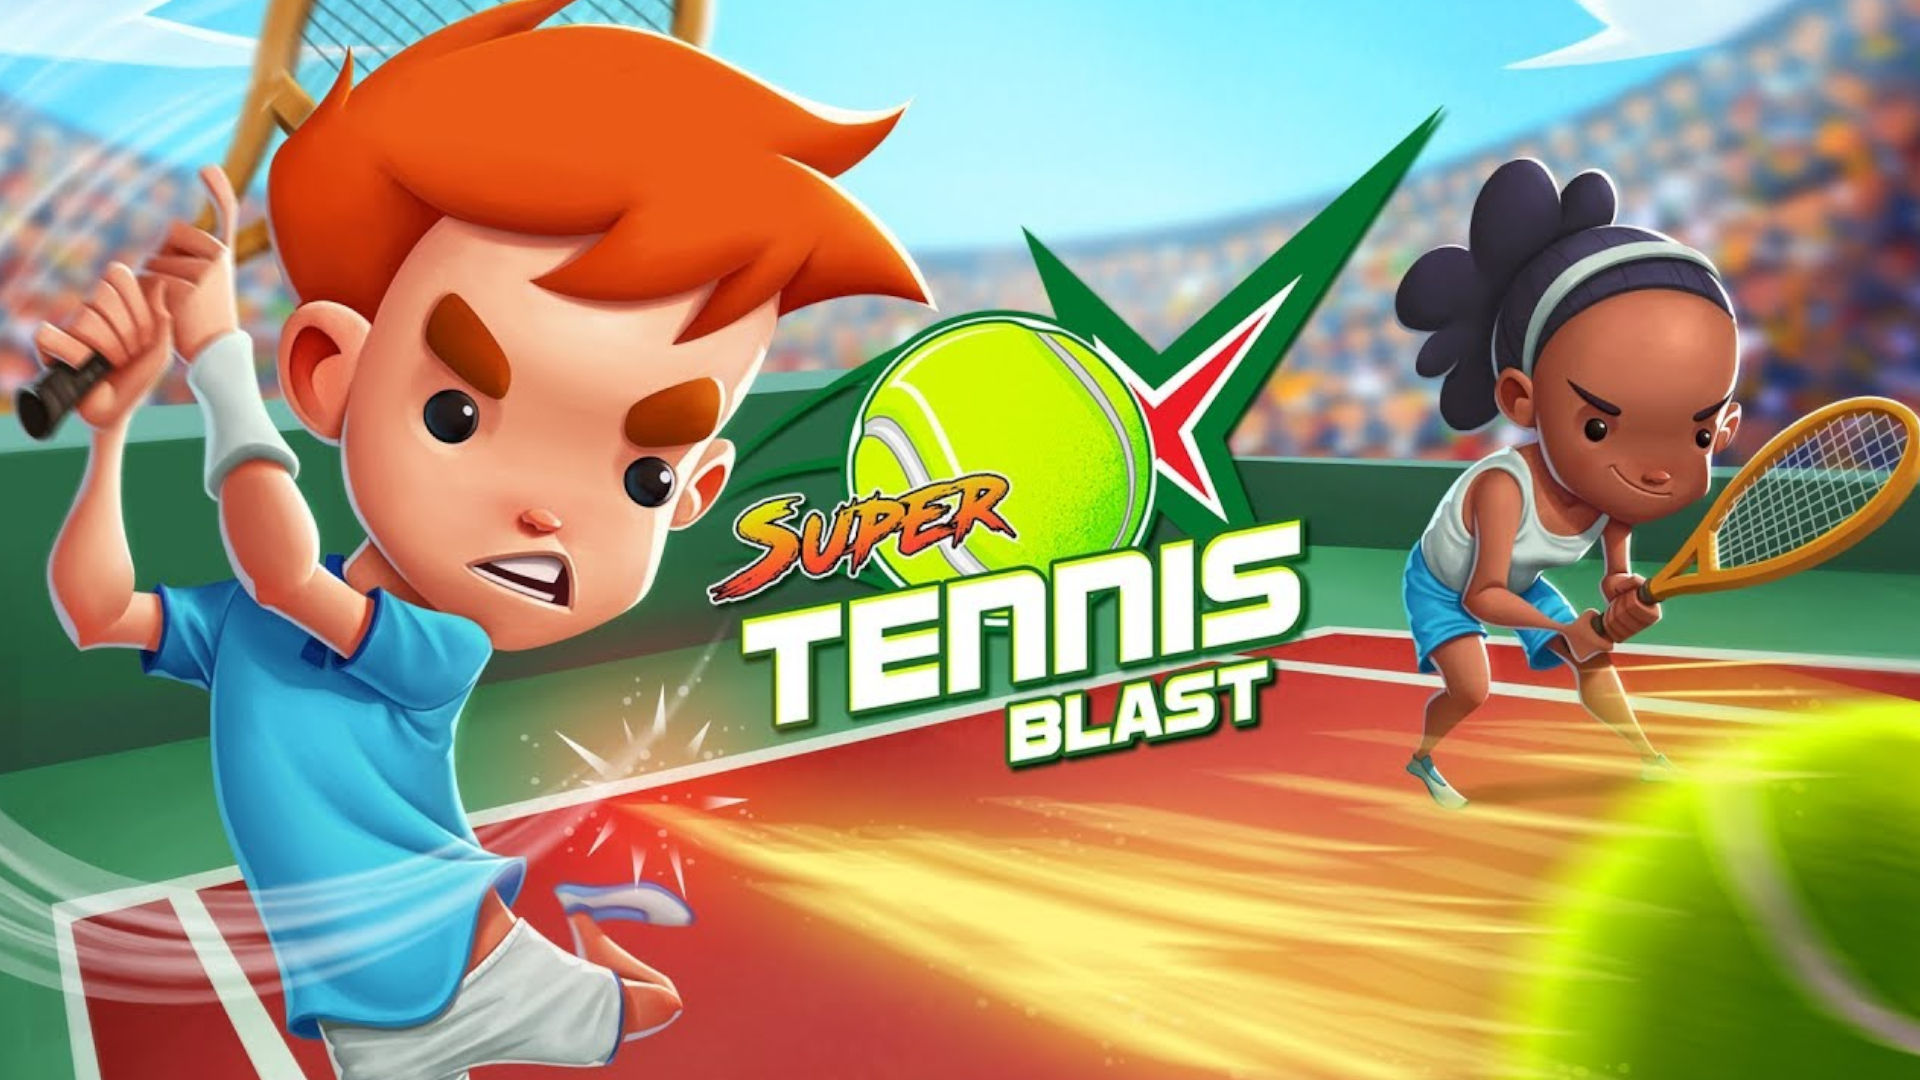 Key art for Super Tennis Blast , one of the Switch arcade tennis games